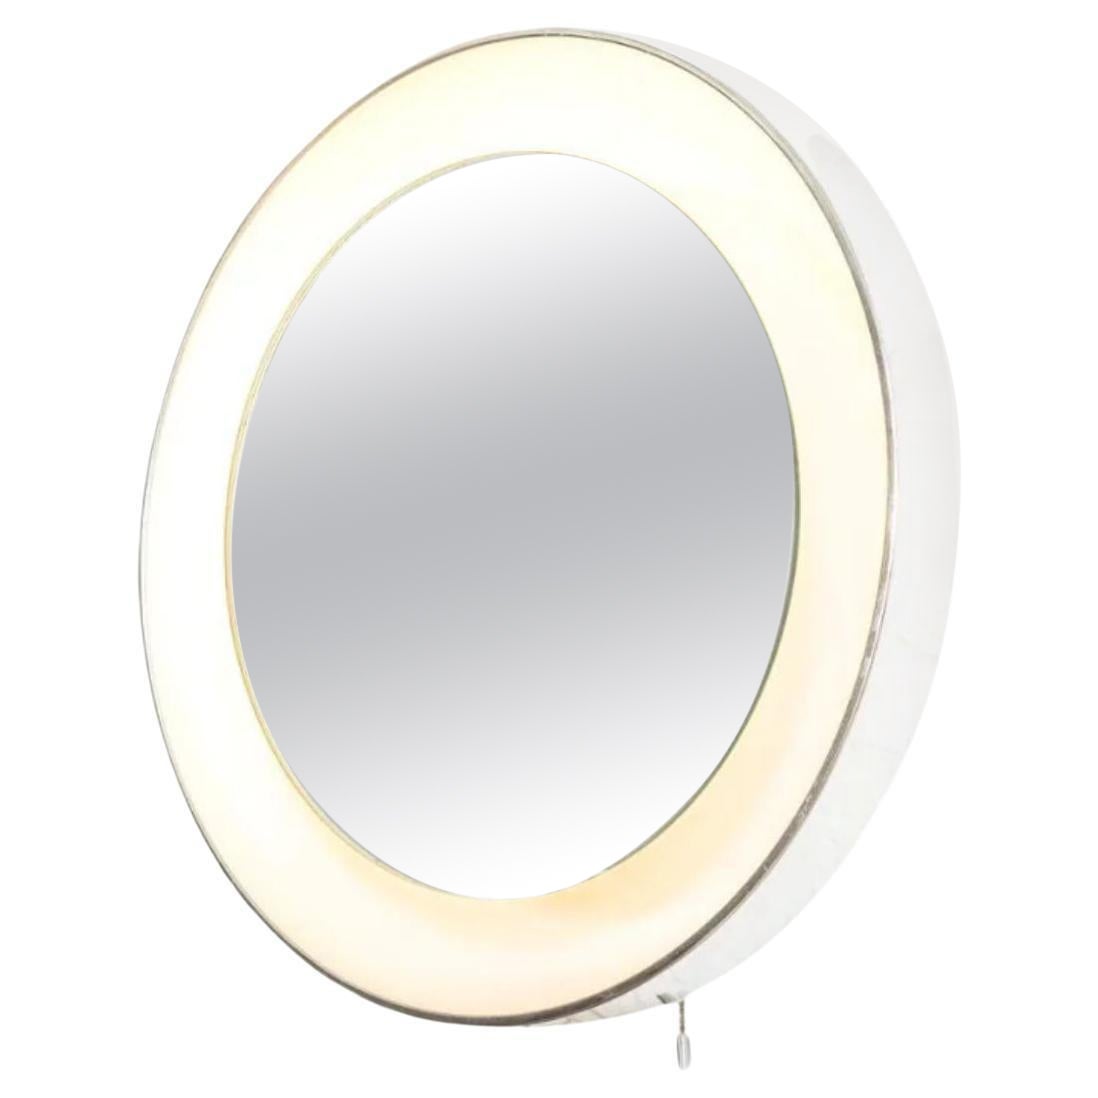 Midcentury White Round Lighted Wall Mirror by Lightolier, 1970s